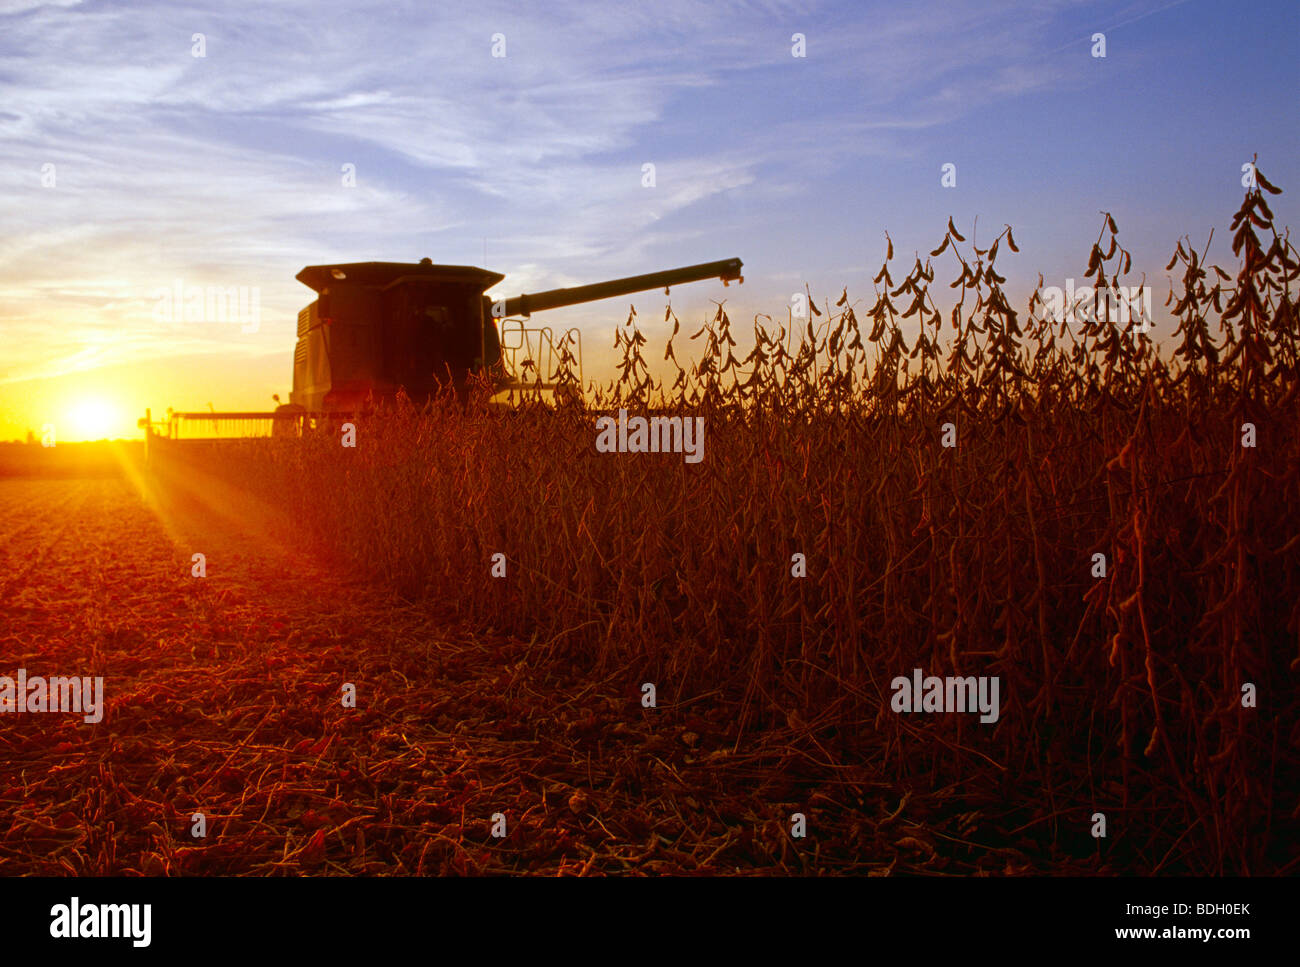 Agriculture - A combine harvests mature soybeans at sunset with a farmstead in the distance / Illinois, USA. Stock Photo